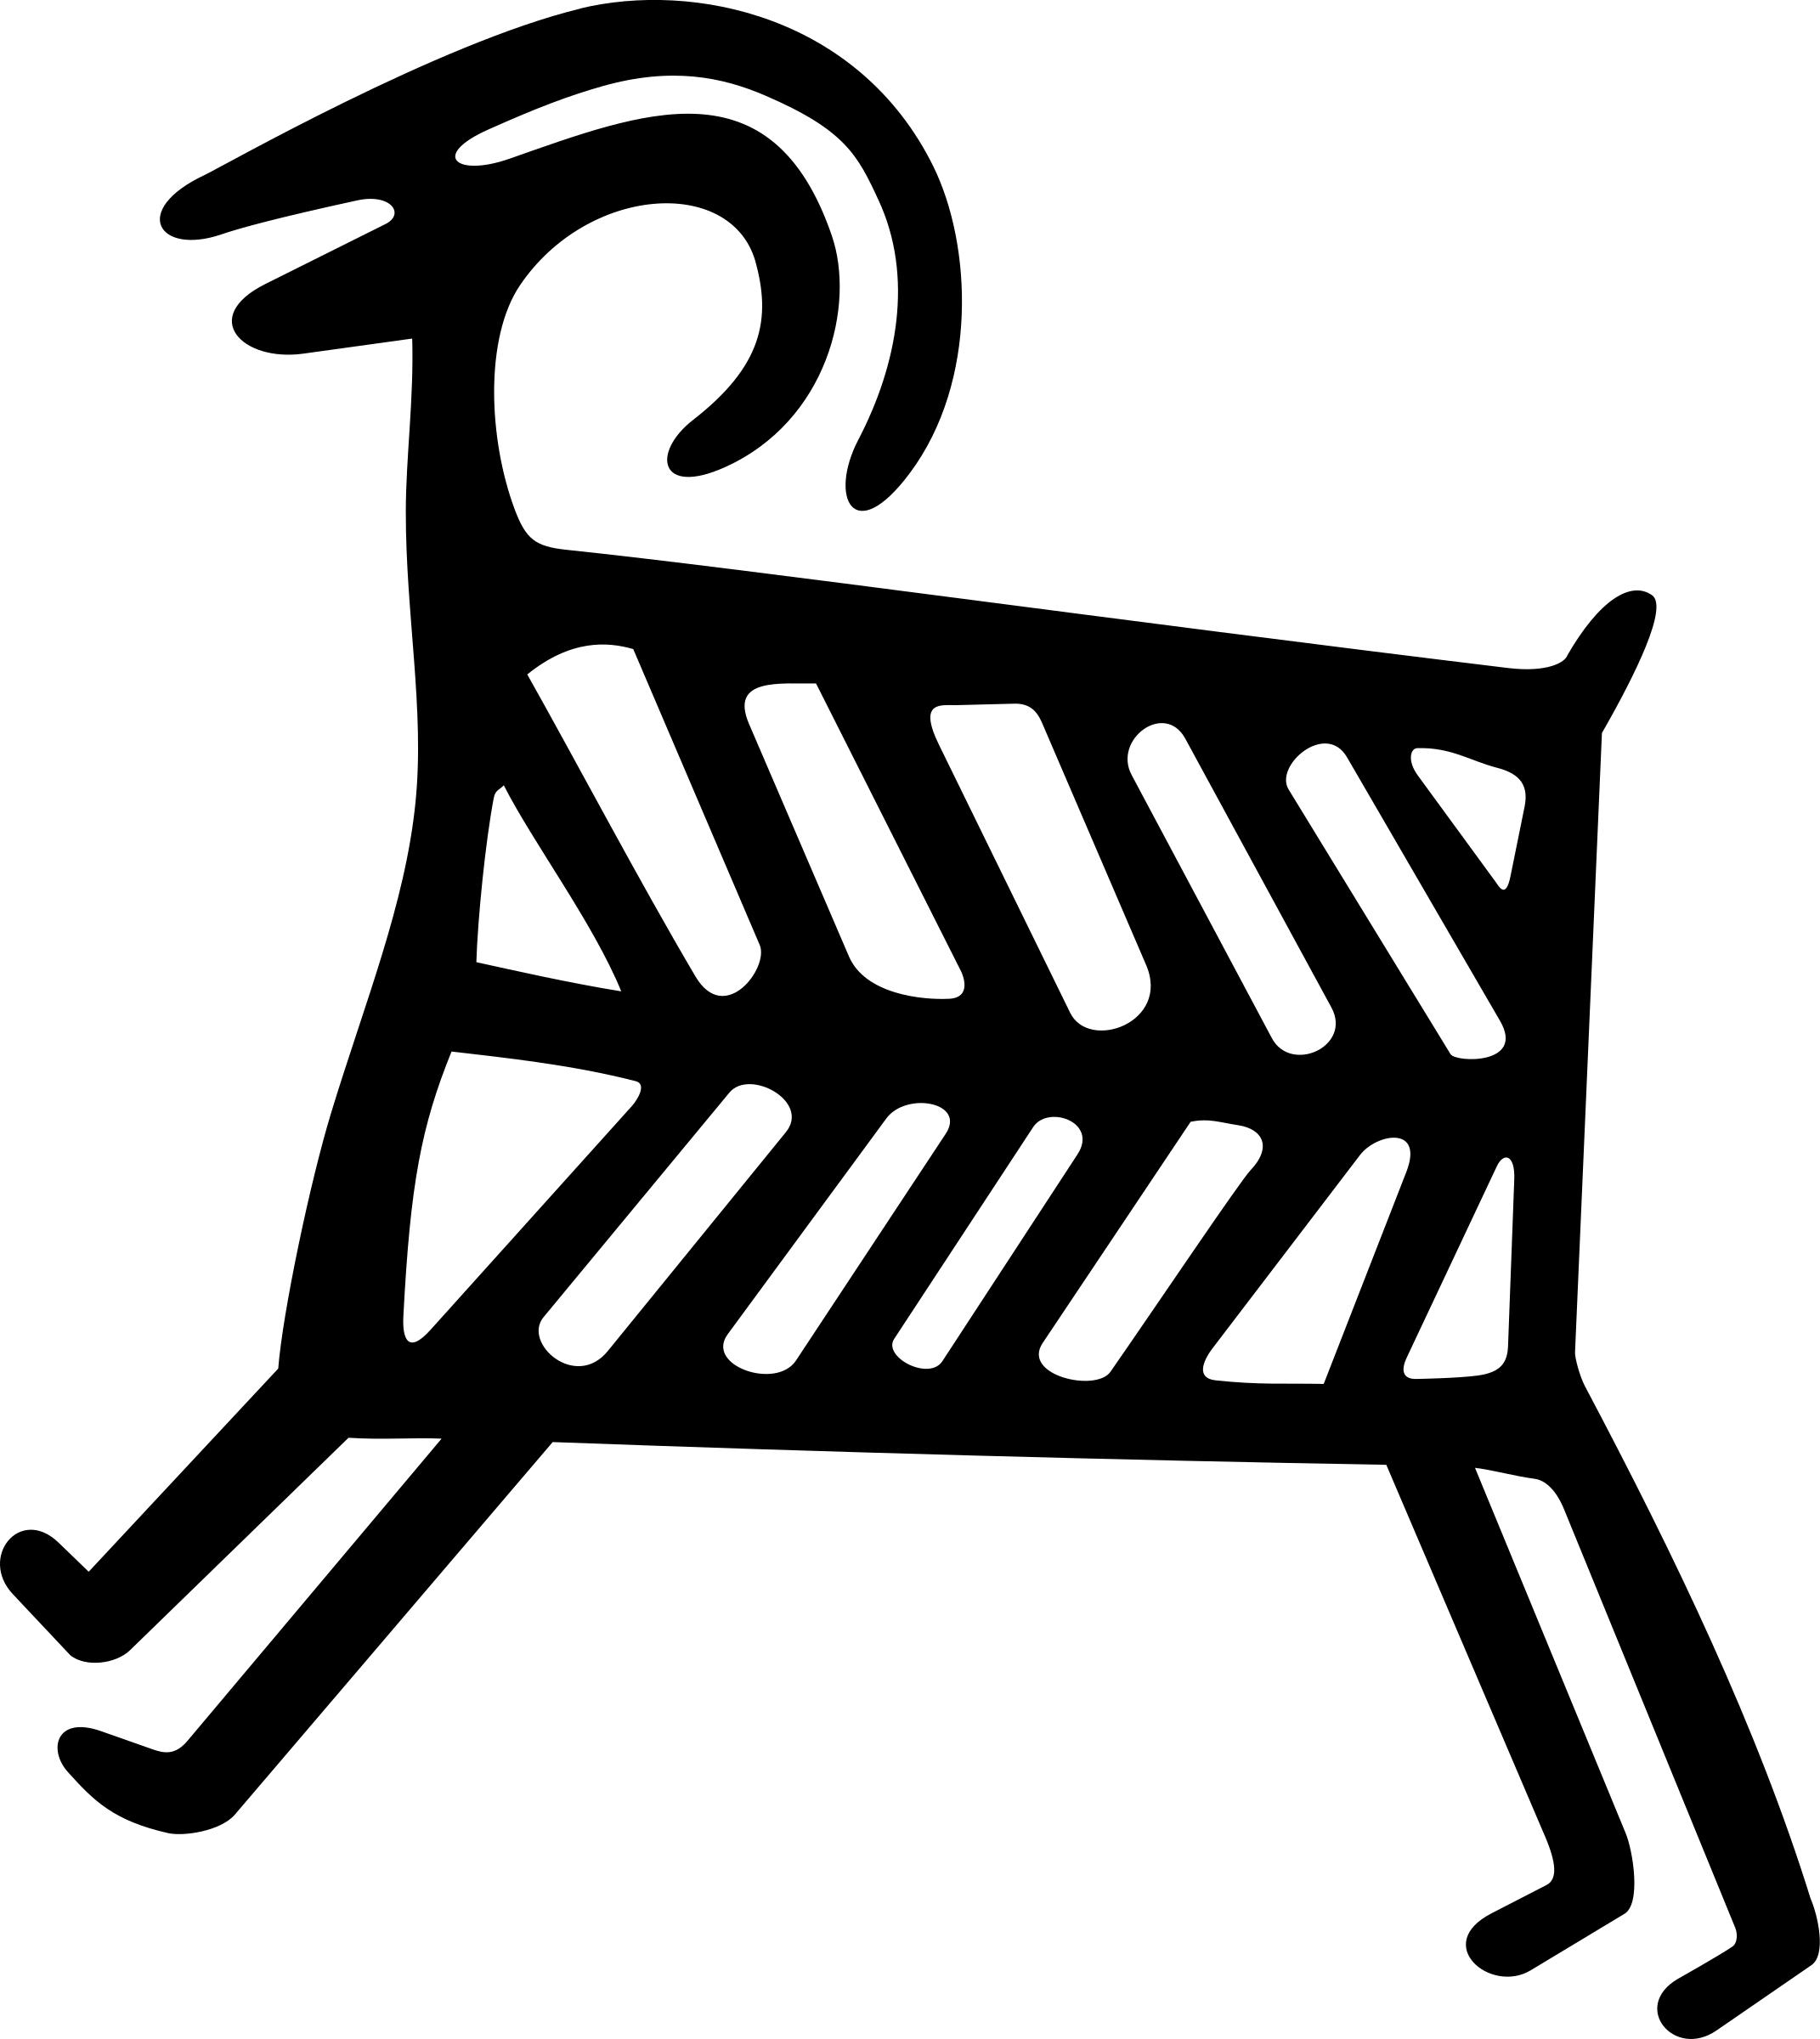 Petroglyph Sheep with internals png